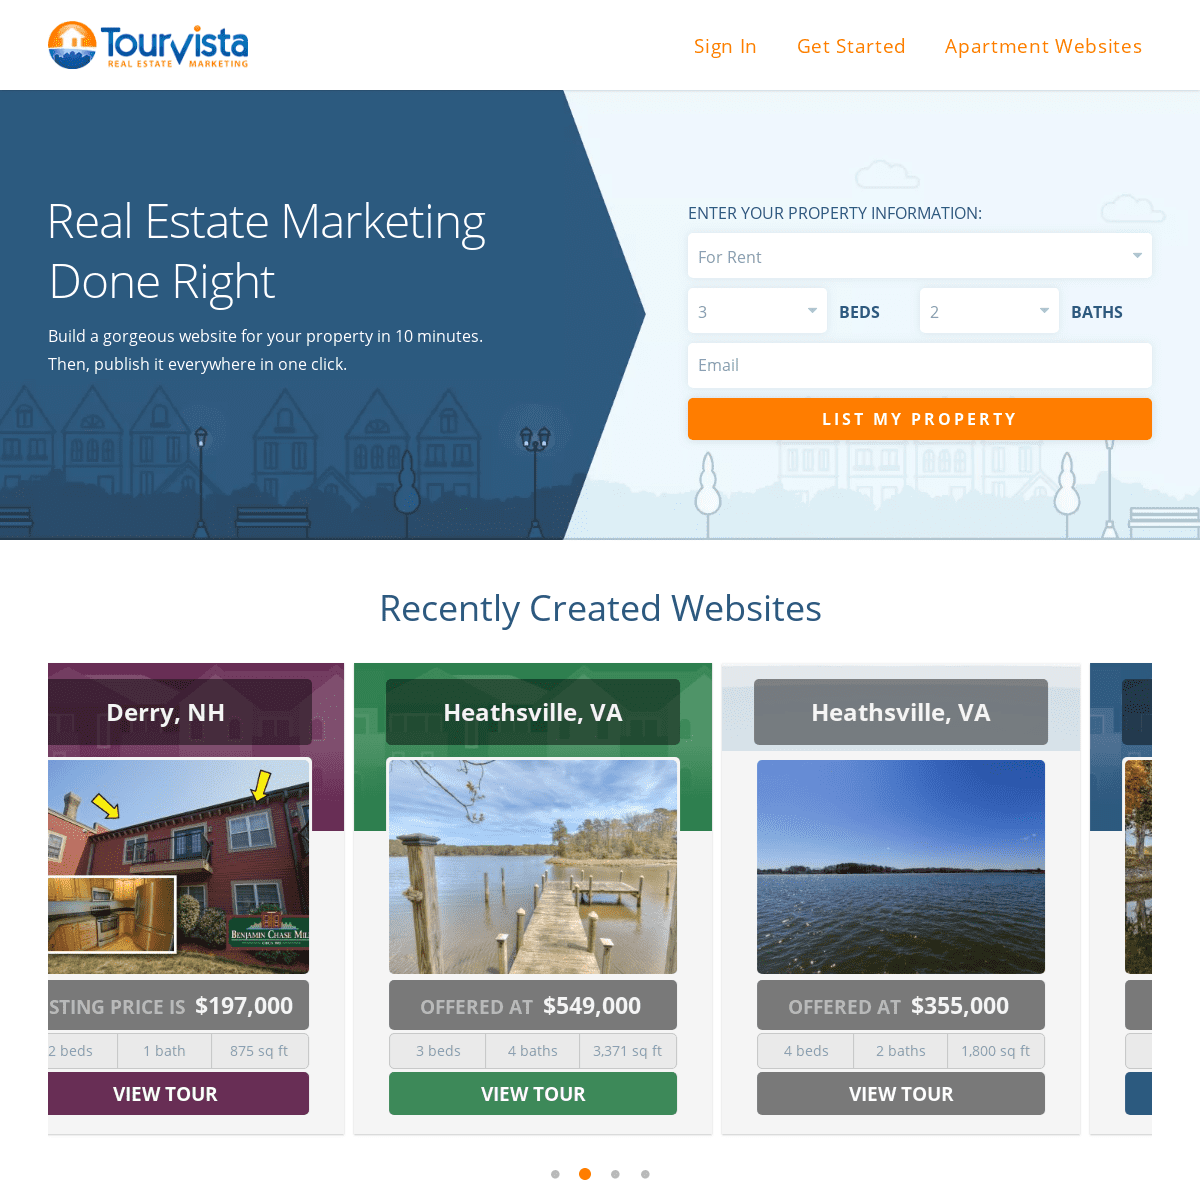 TourVista - Websites for Marketing Real Estate and Generating Leads